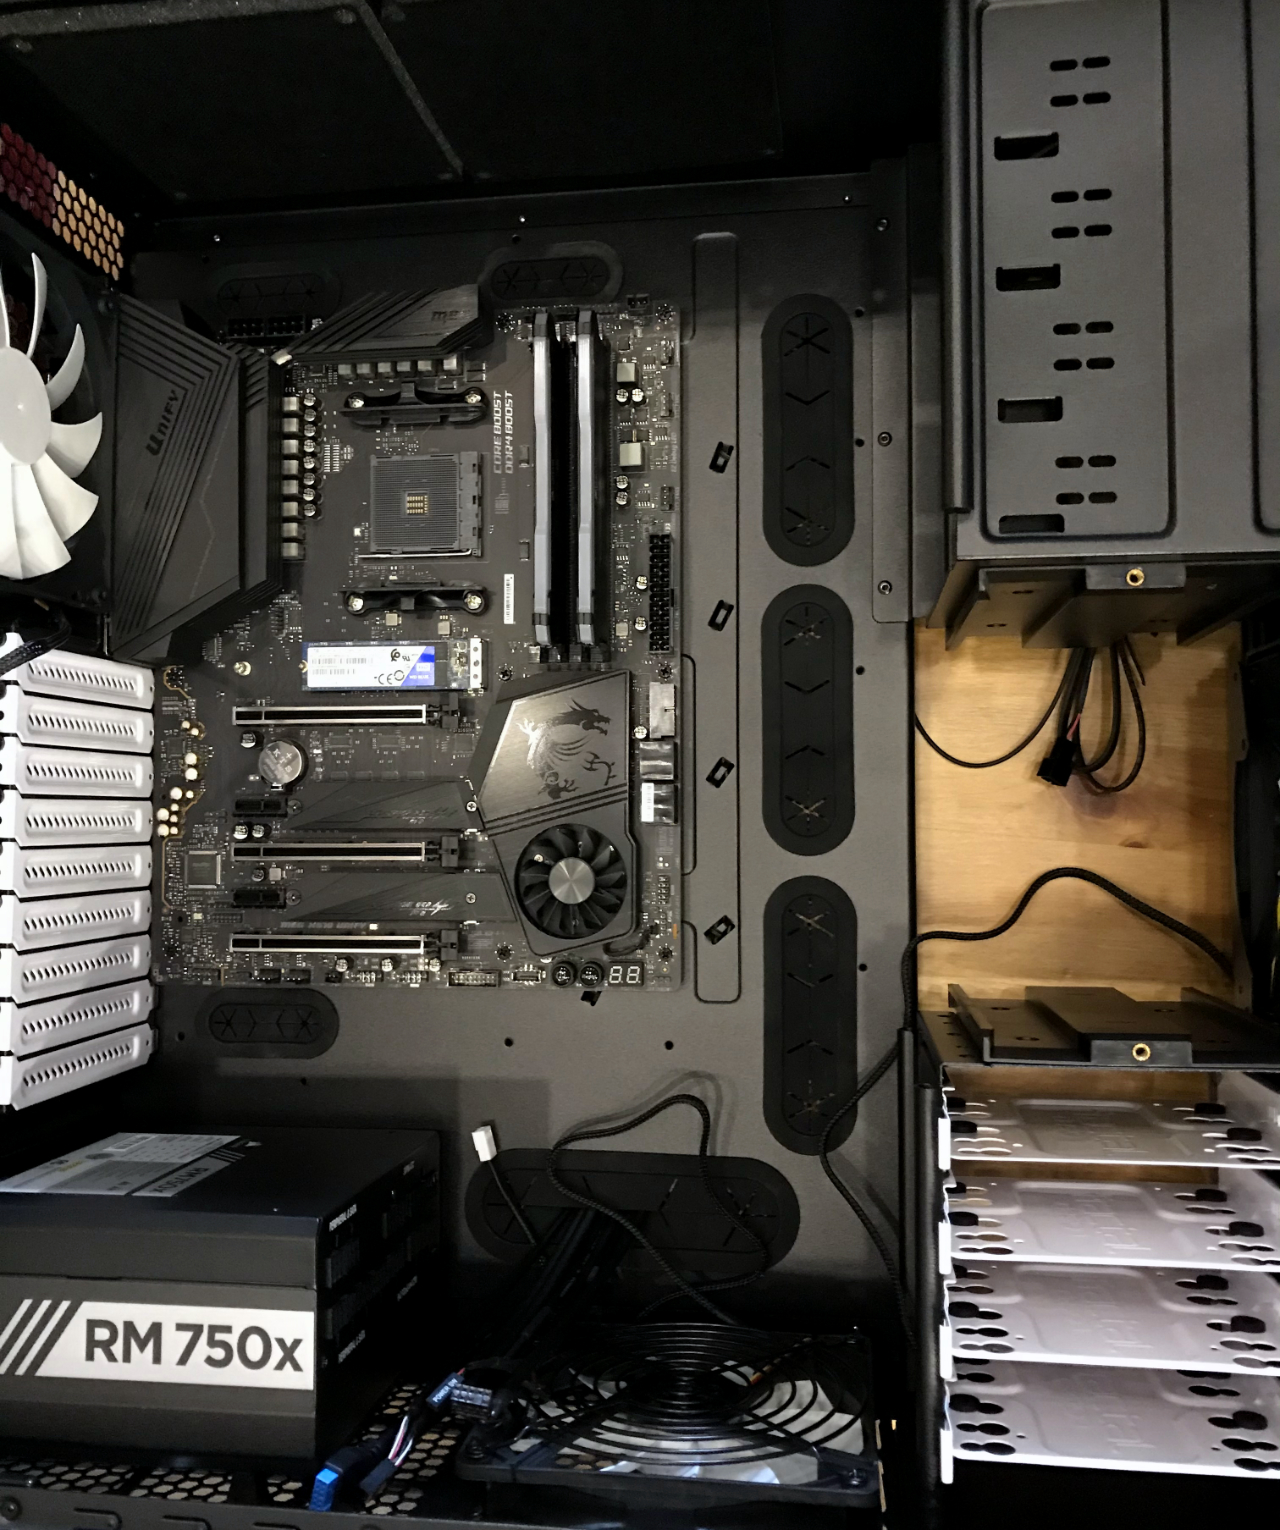 Motherboard installed into the case.